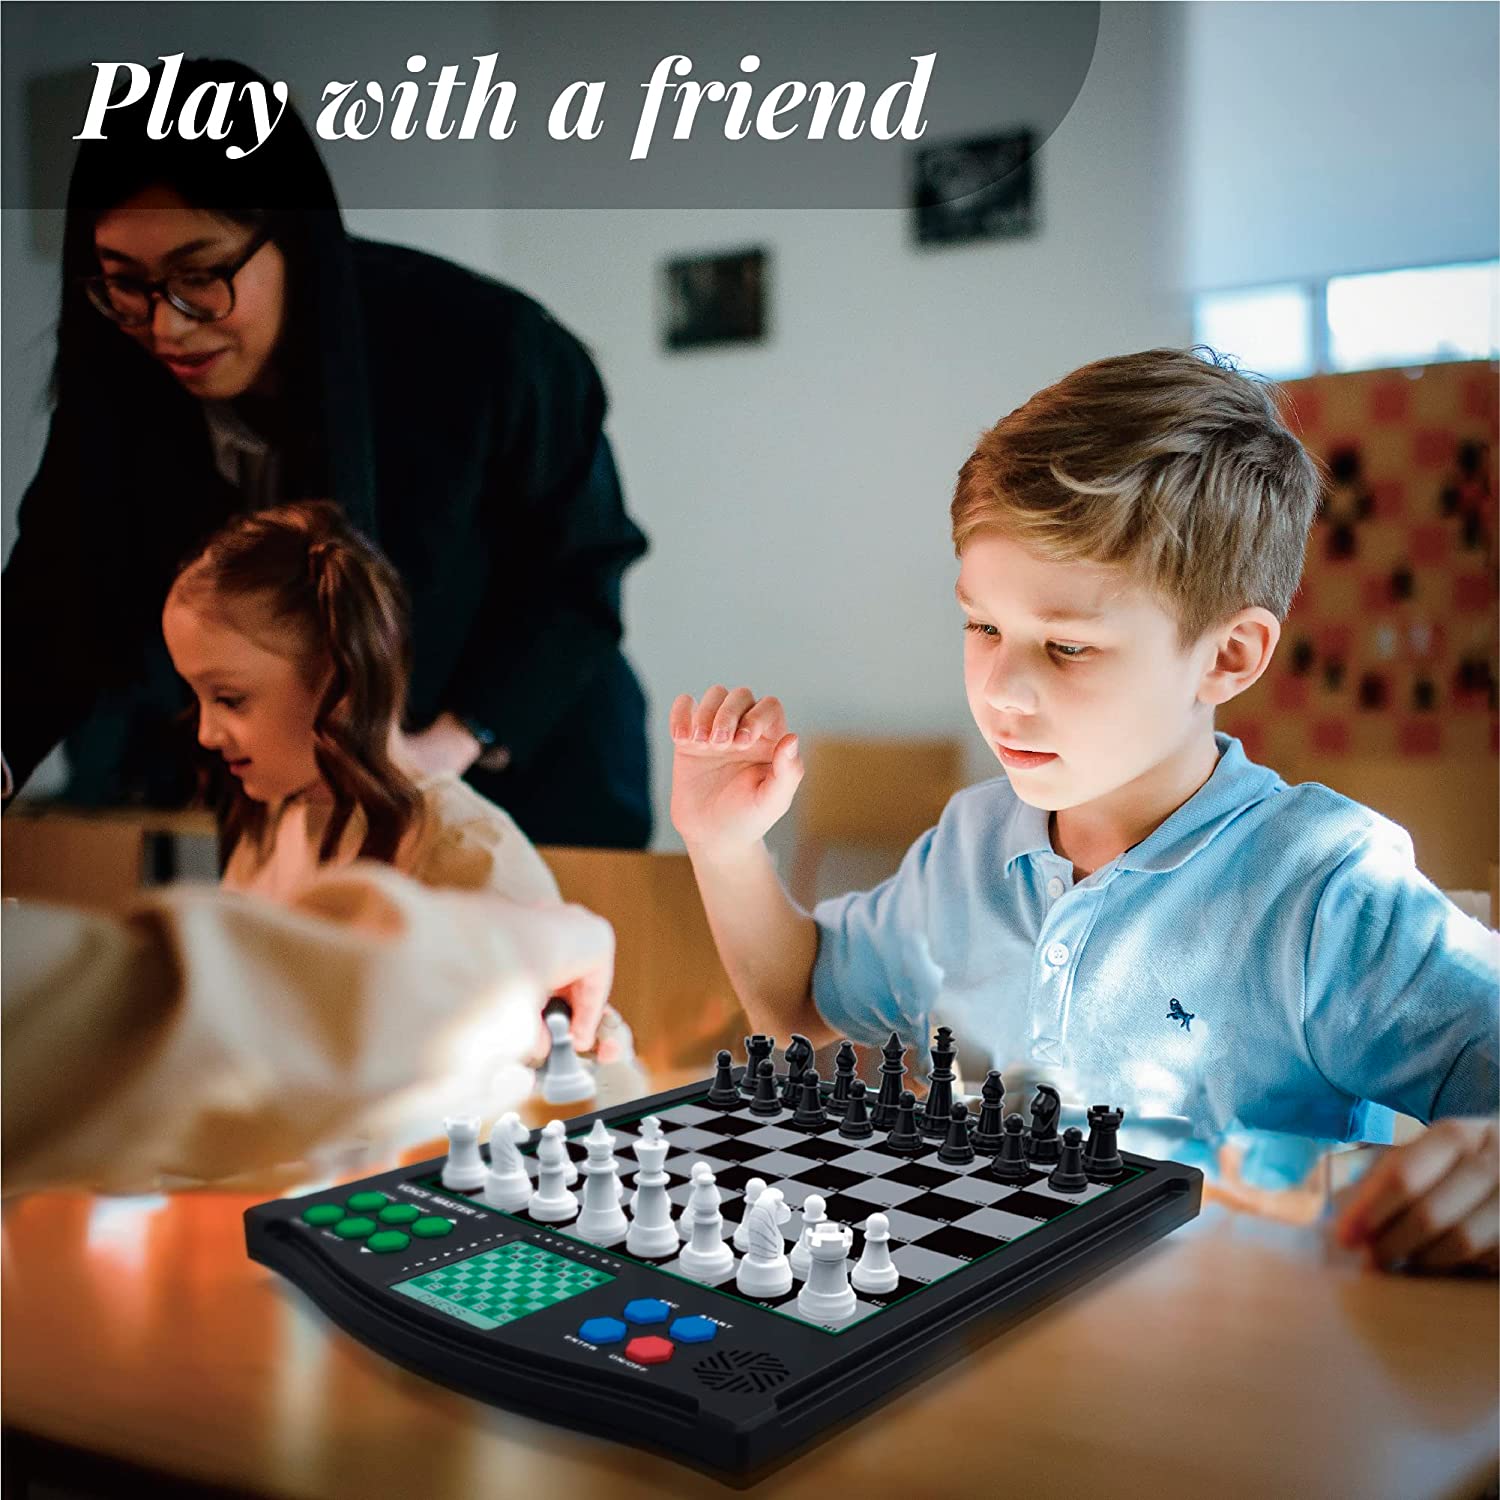 Top 1 Chess Electronic Chess Set, Chess Sets for Adults, Chess Set for  Kids, Voice Chess Computer Teaching System, Chess Strategy Beginners  Improving